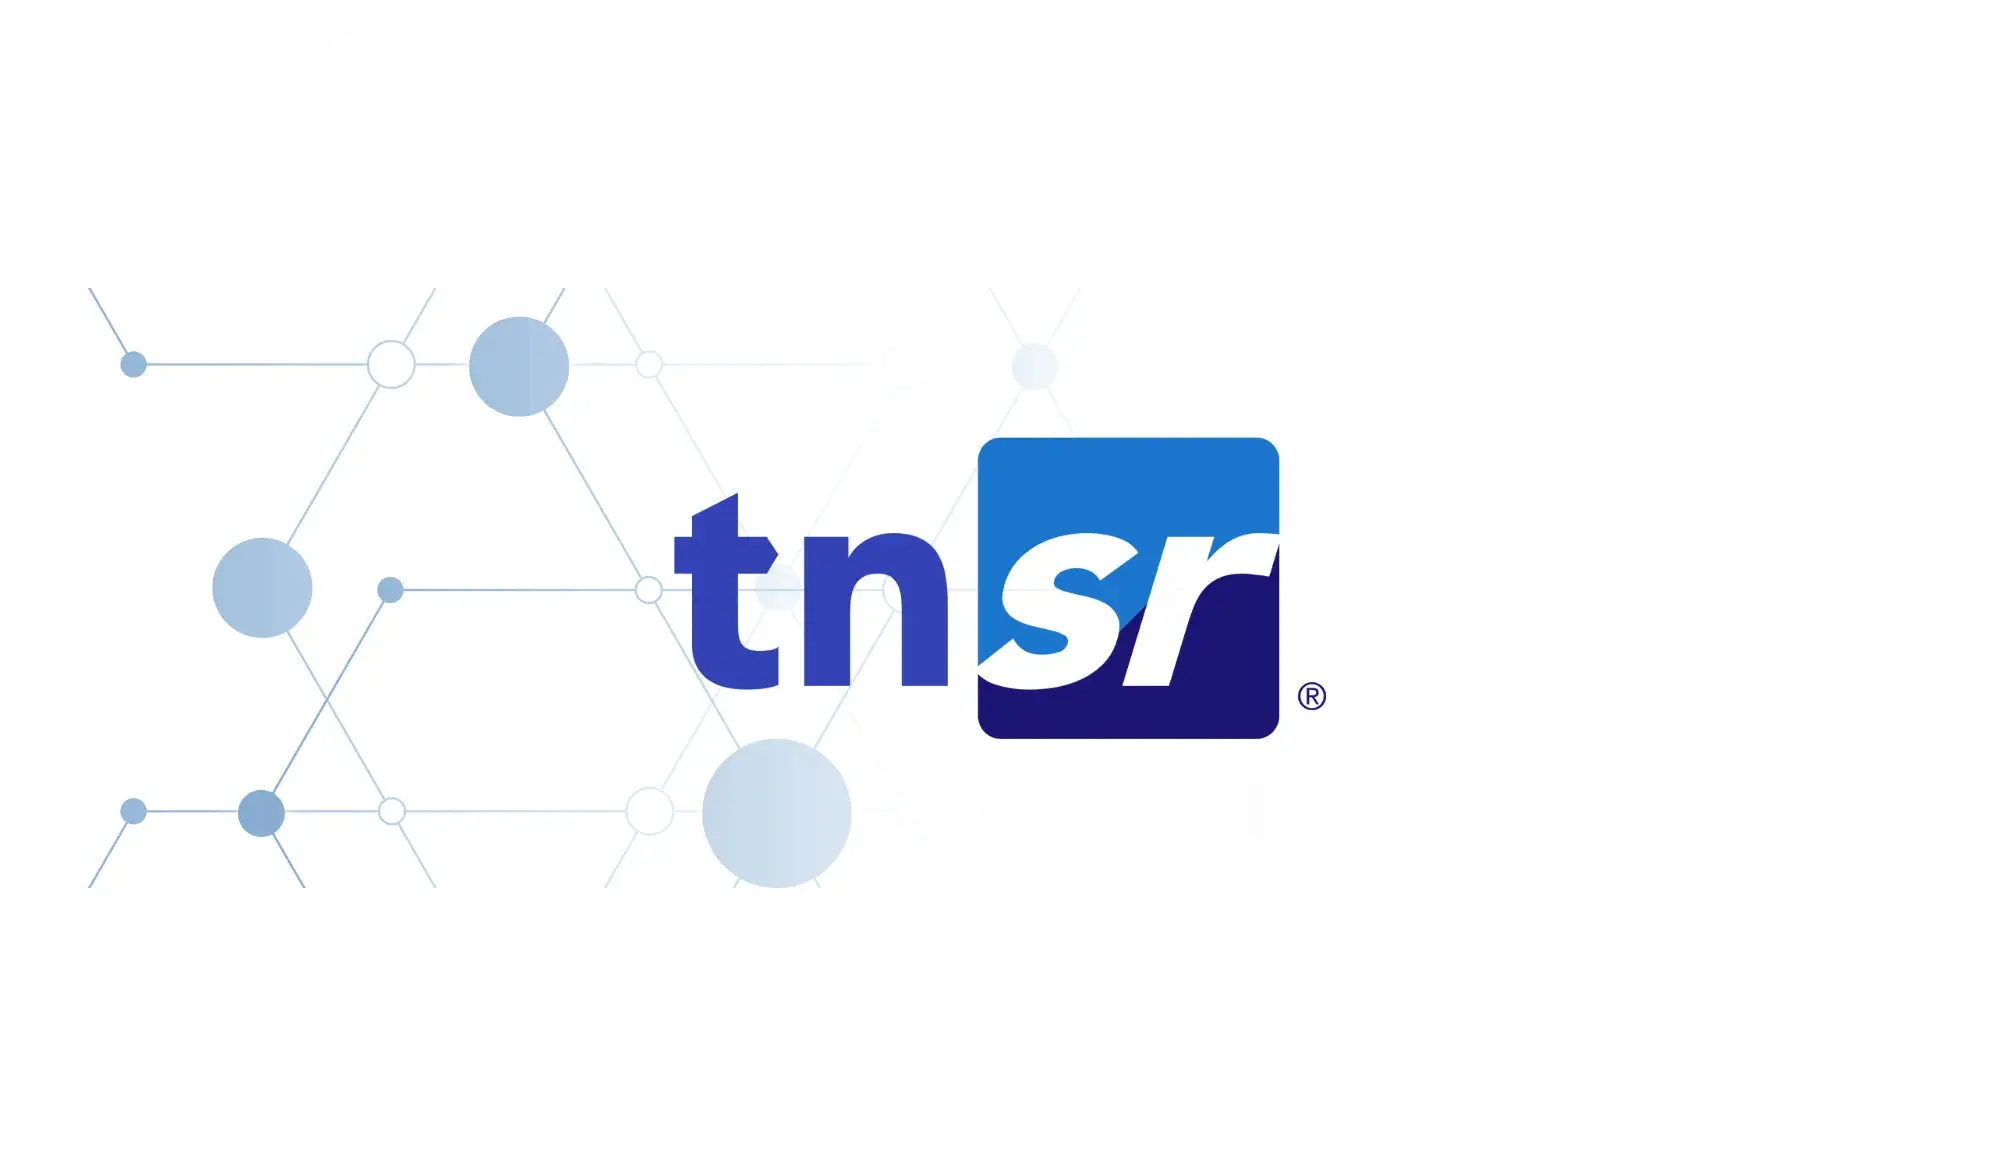 Setting Up Postman for TNSR Management via API: a Step-by-Step Guide